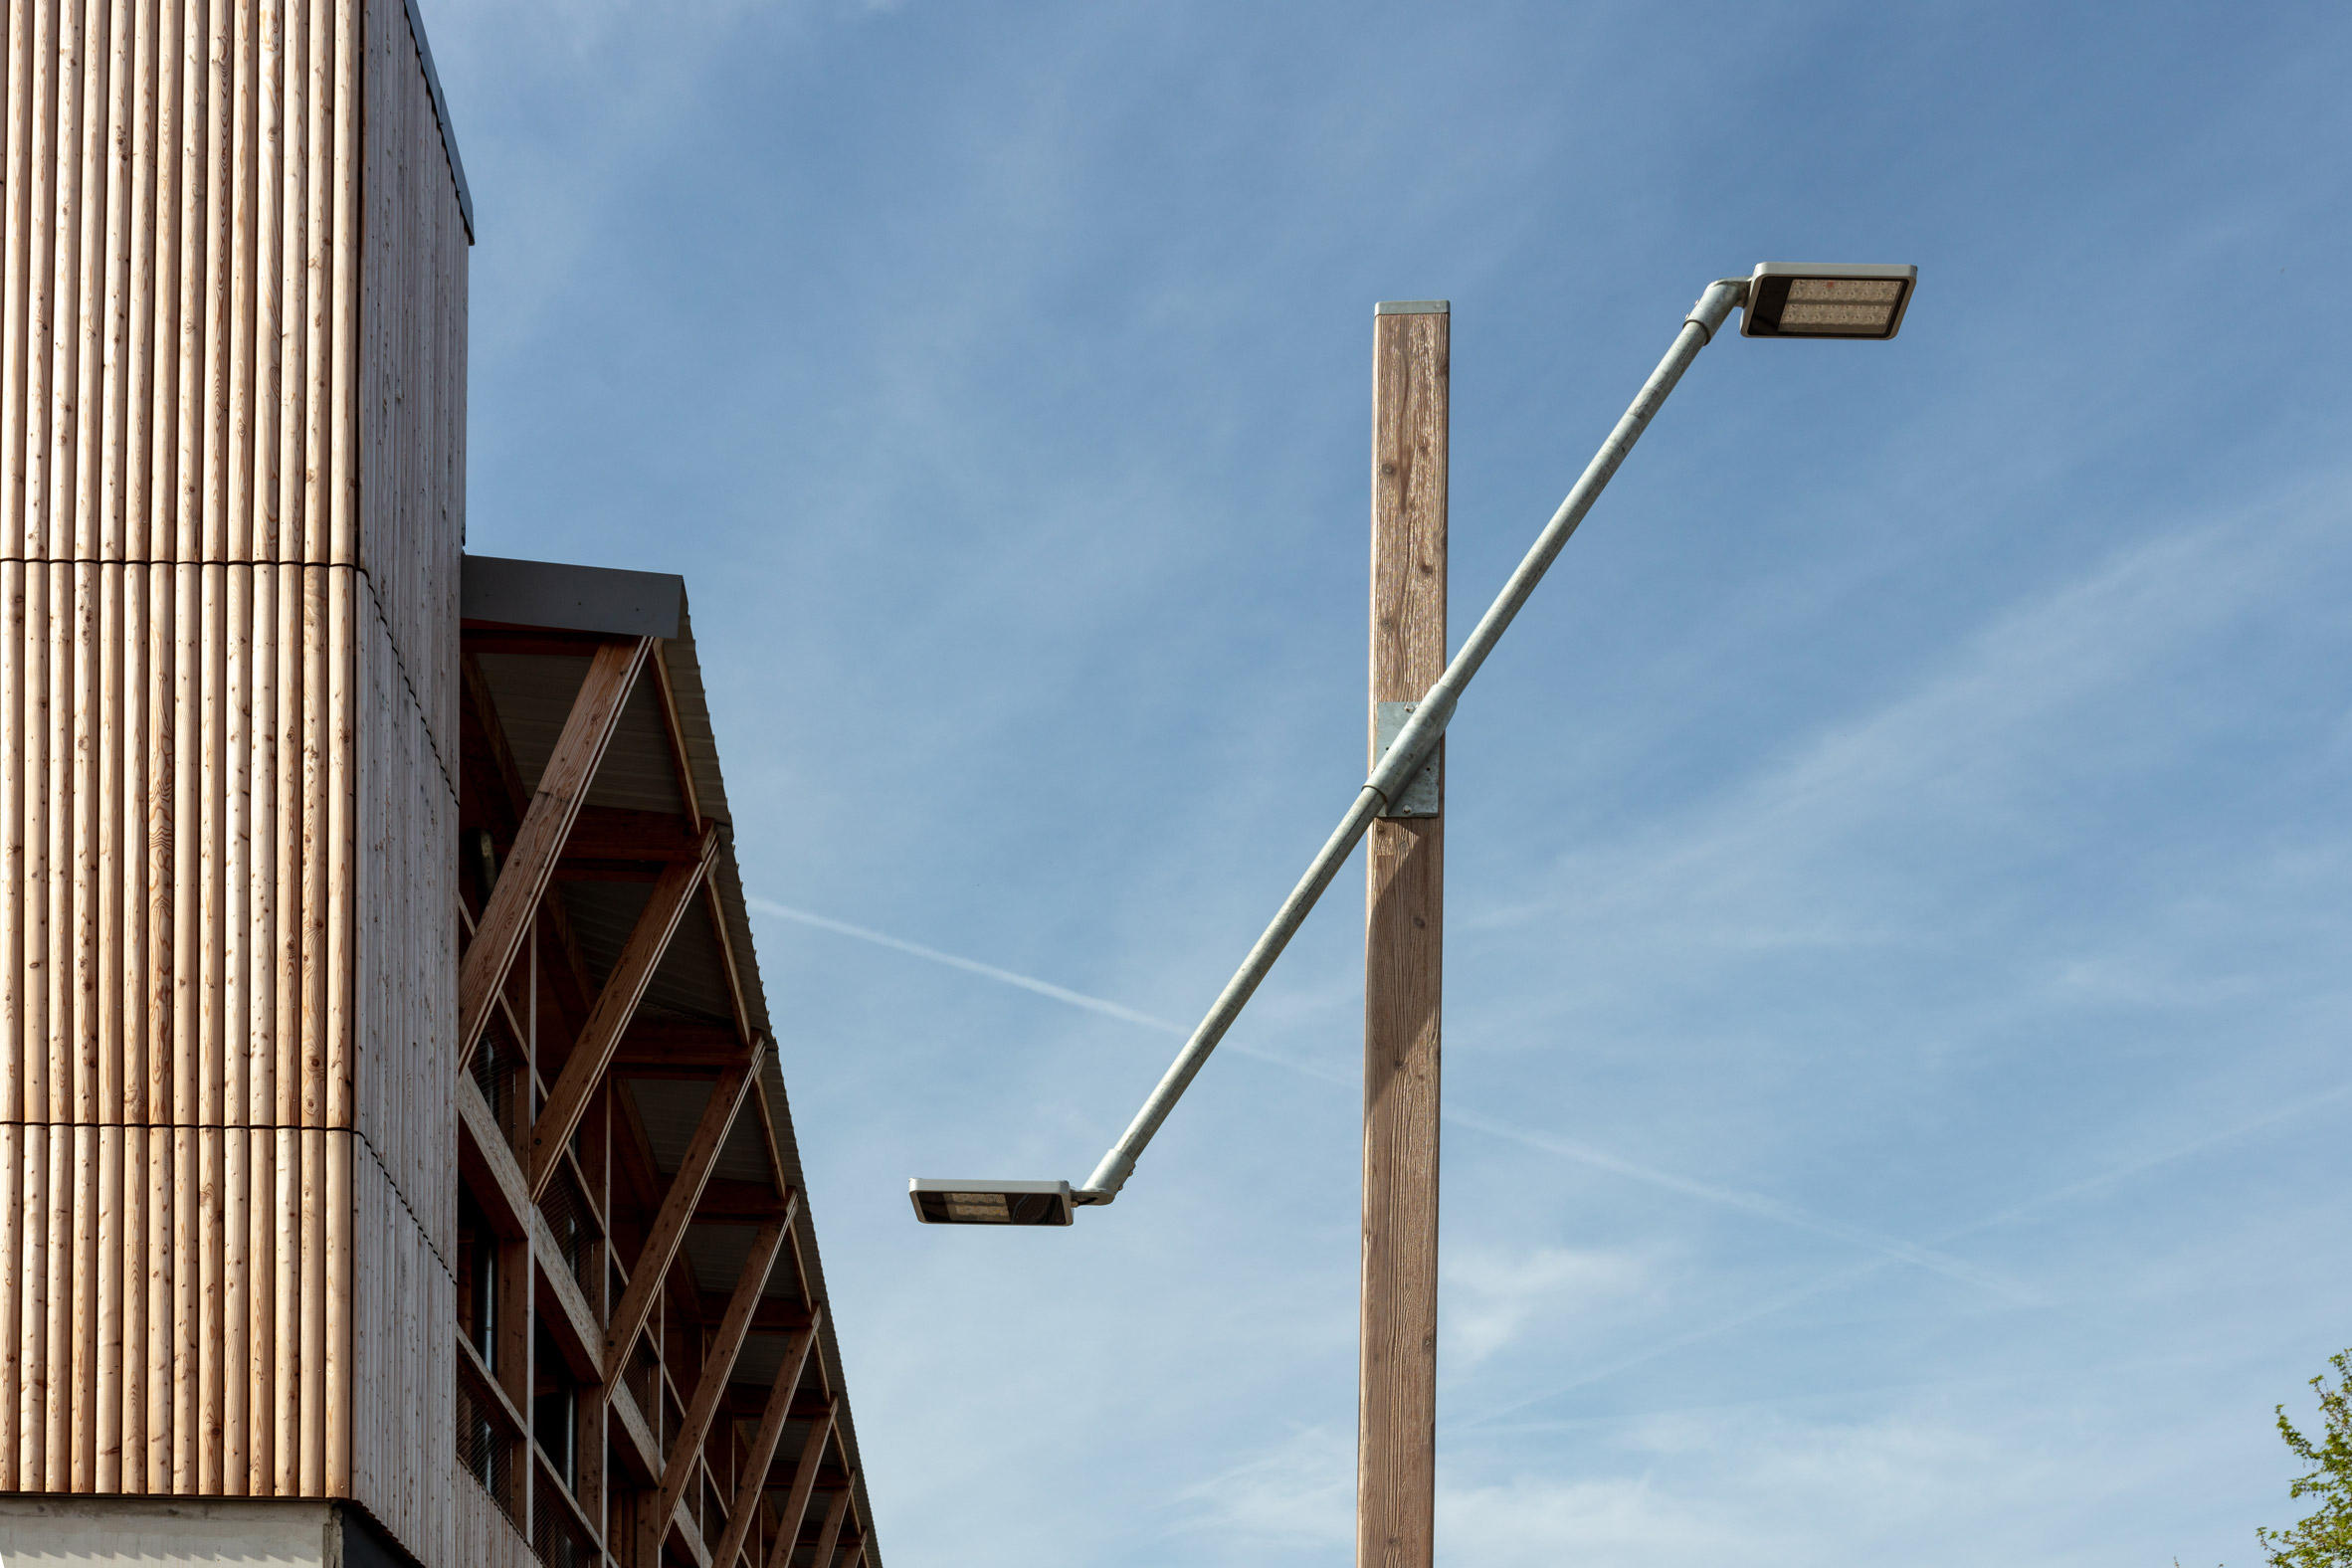 Street light made from salvaged scaffolding poles